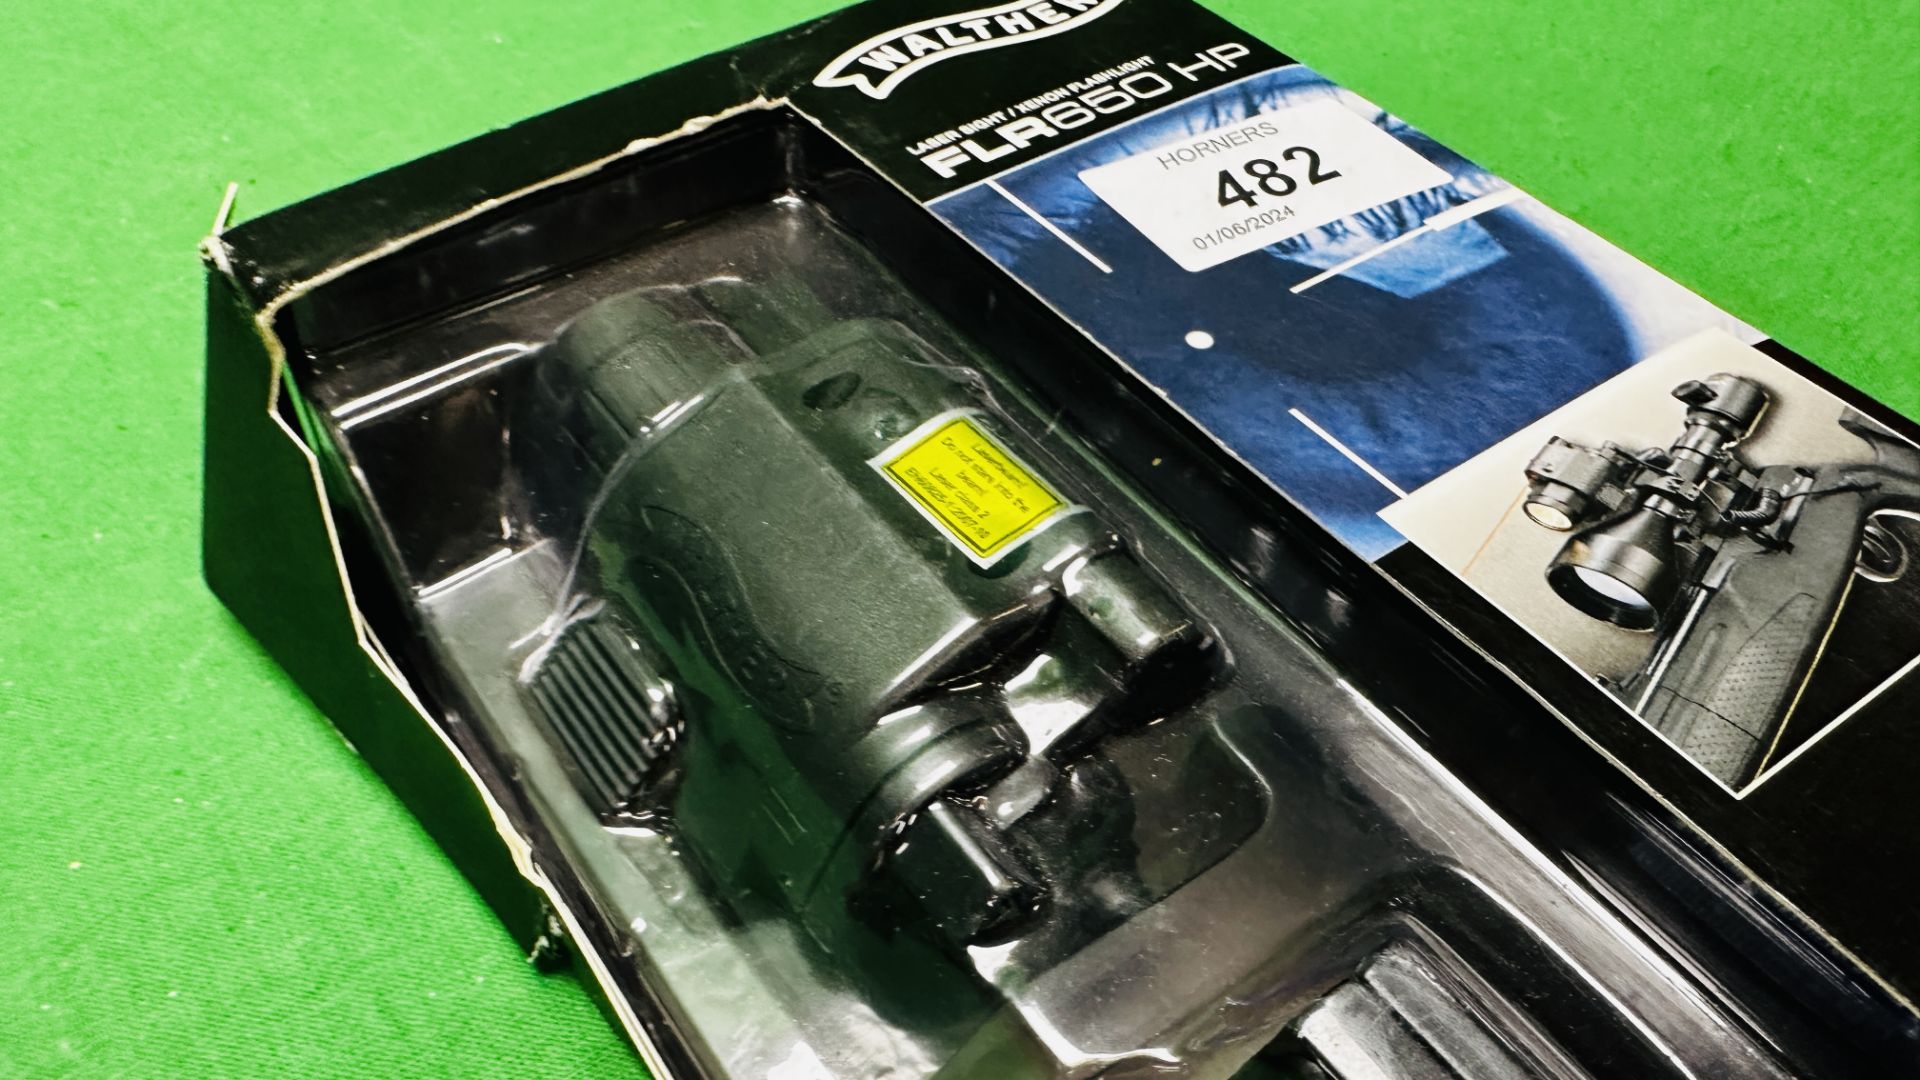 A BOXED WALTHER FLR650HP LASER SIGHT/XEON FLASHLIGHT - Image 3 of 5